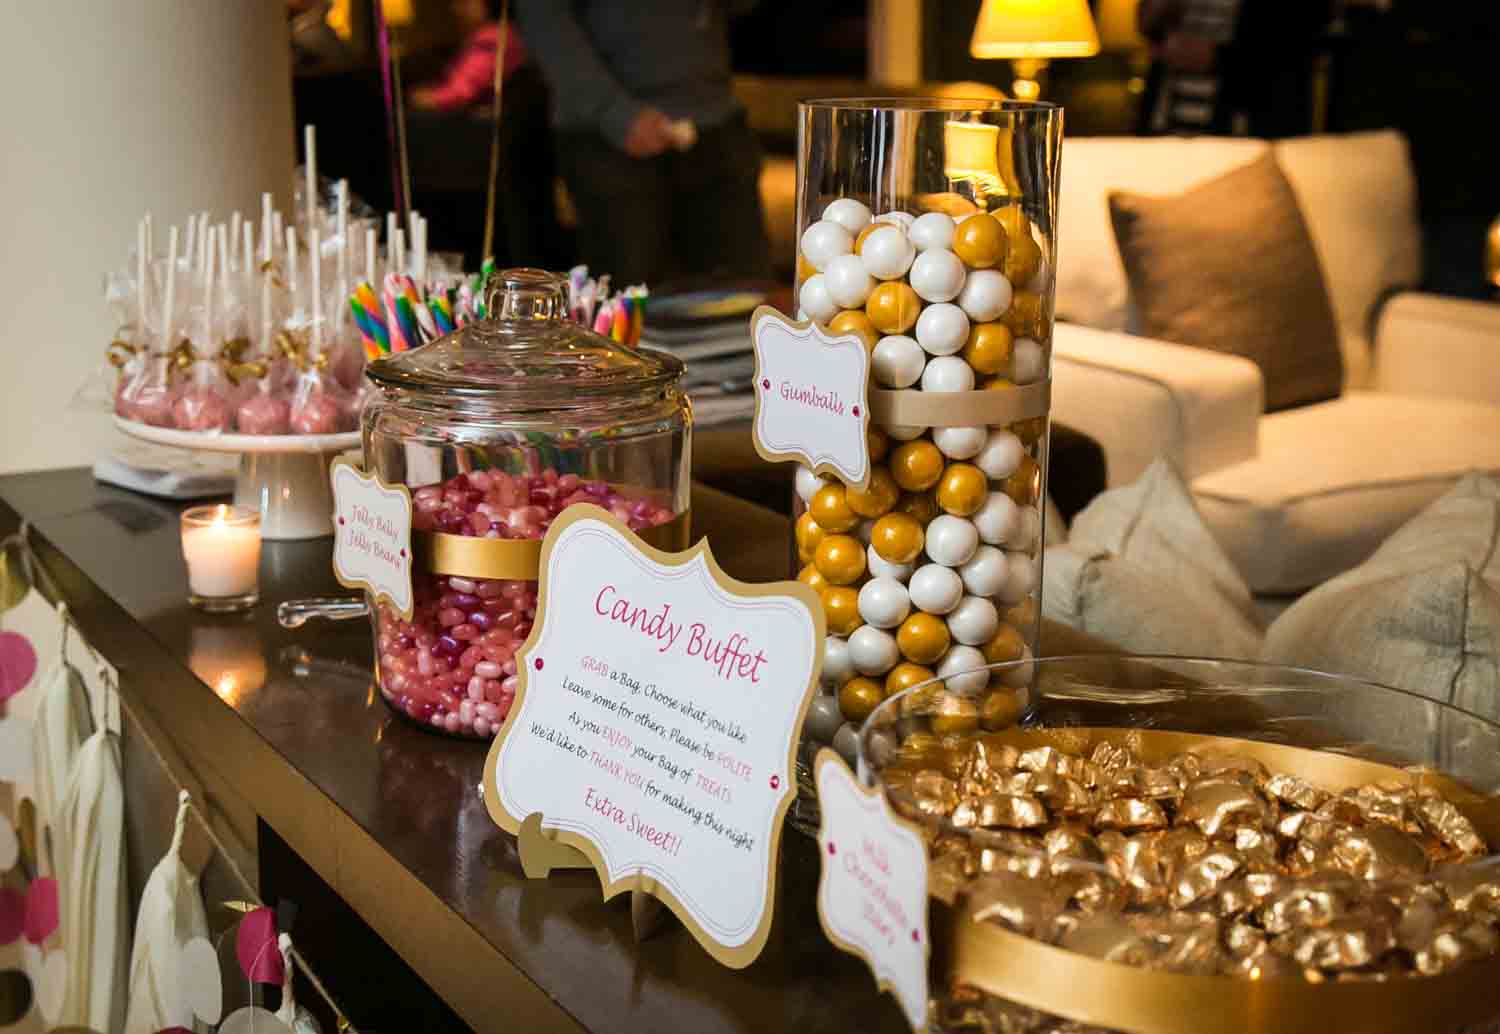 Candy buffet with gold-wrapped candies